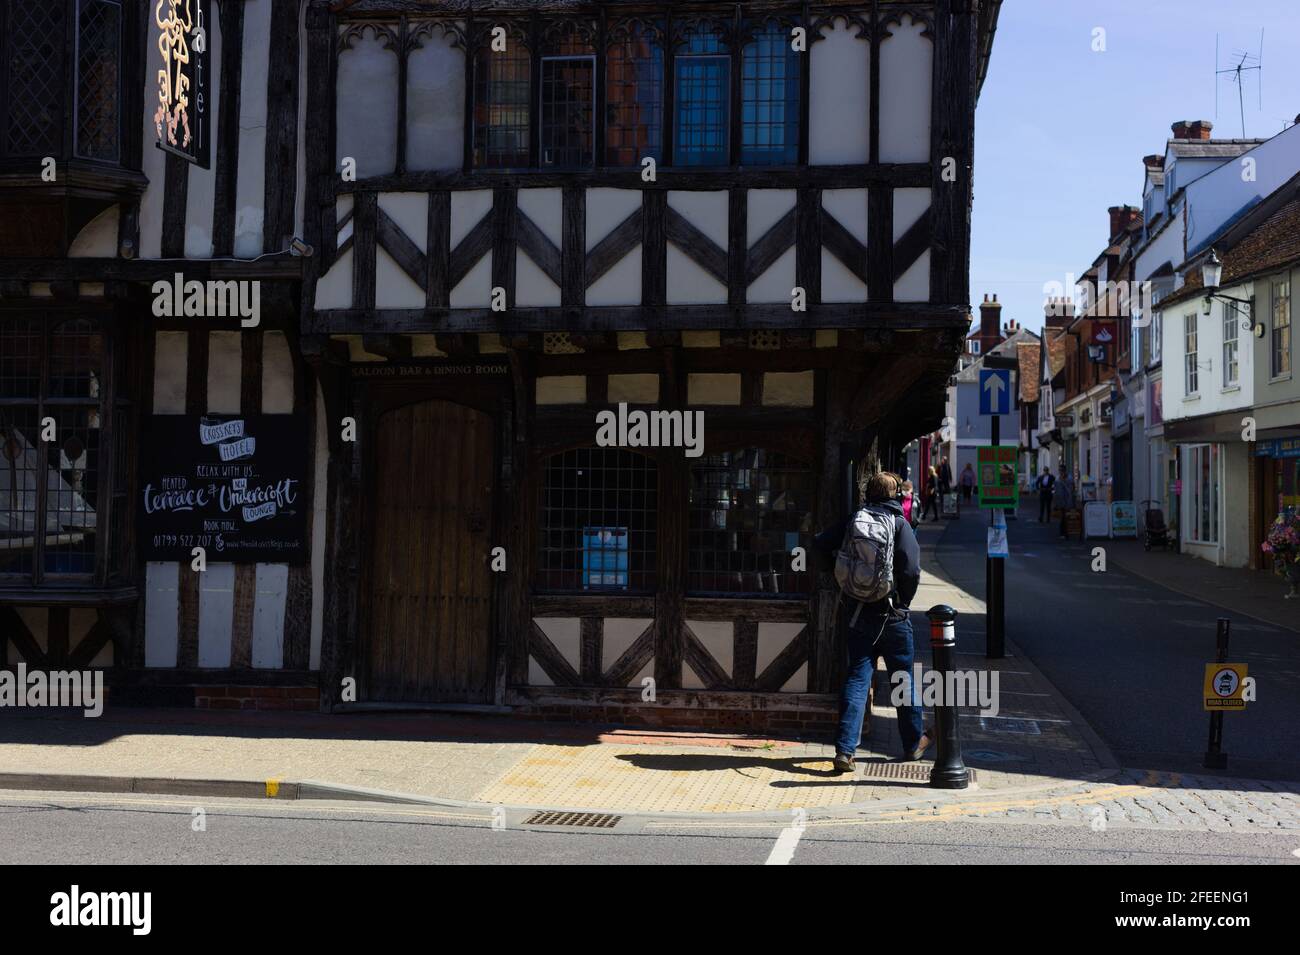 Rear view of a young man carrying a rucksack crossing the street towards the historic Cross Keys Hotel building, Saffron Walden, Essex, Britain, April Stock Photo